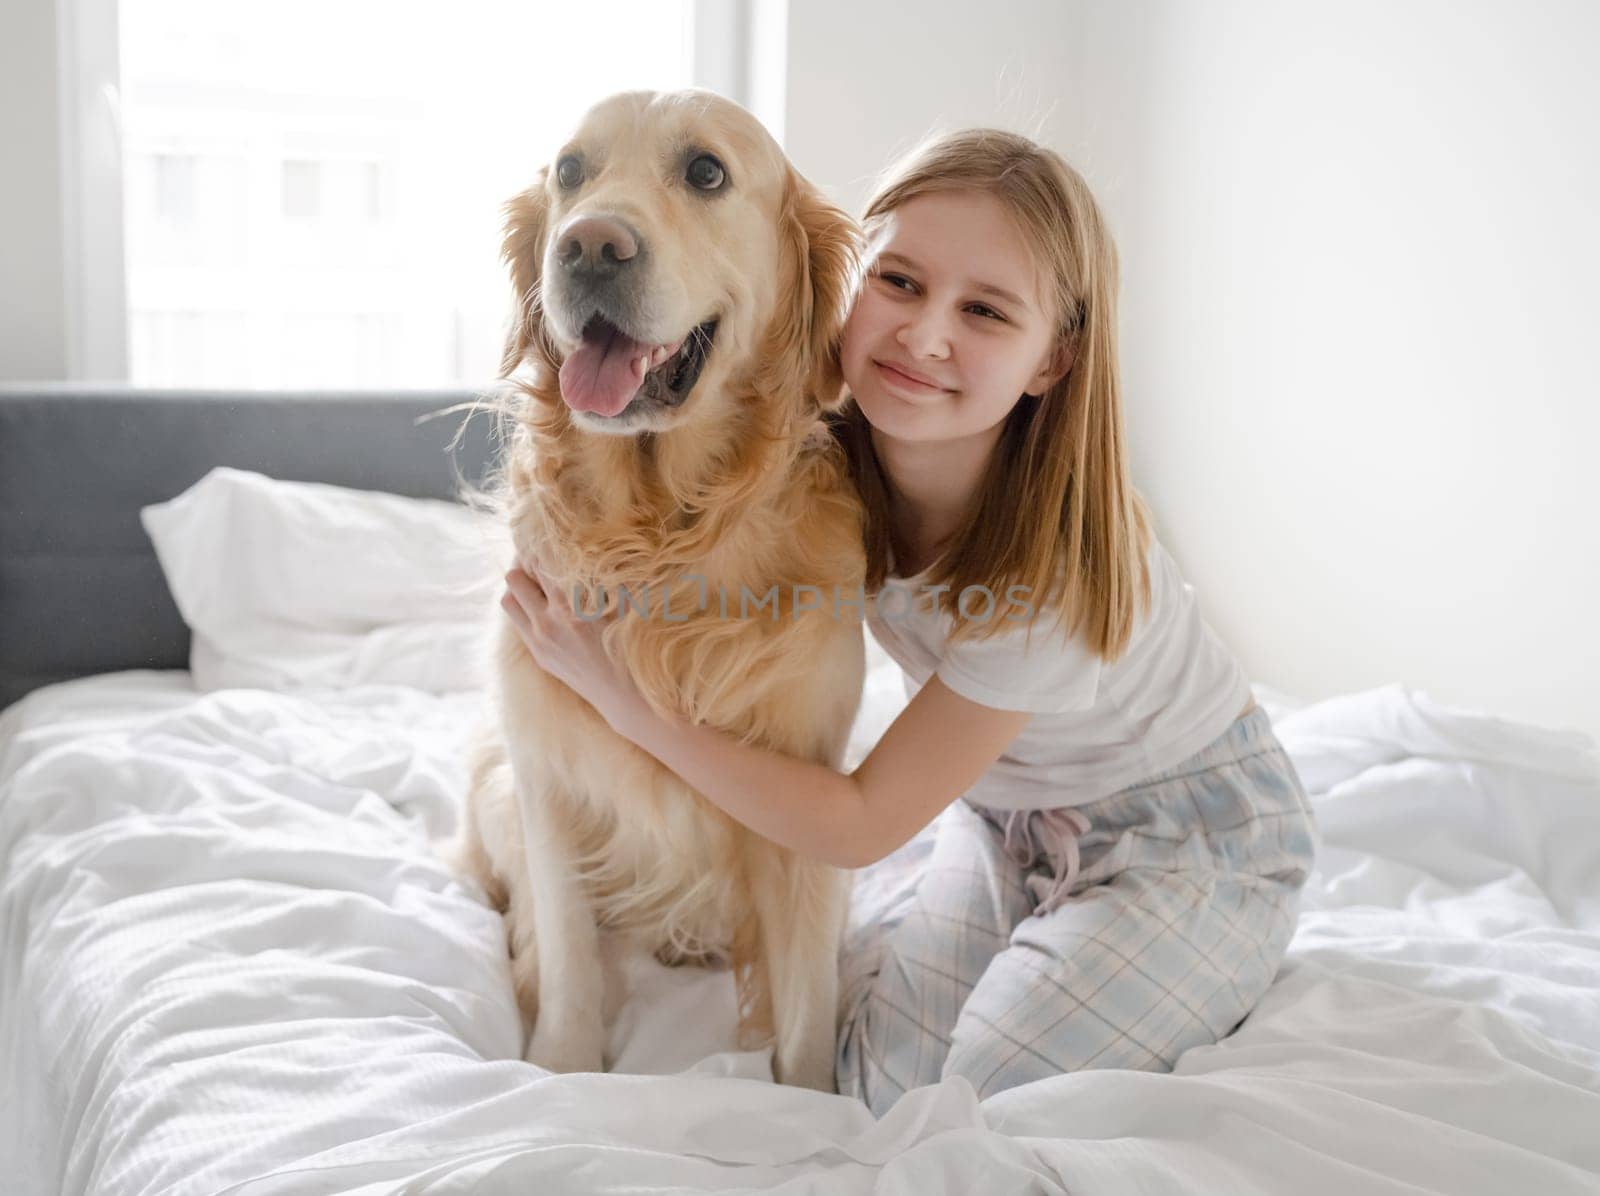 Girl Poses With Golden Retriever On Bed by tan4ikk1